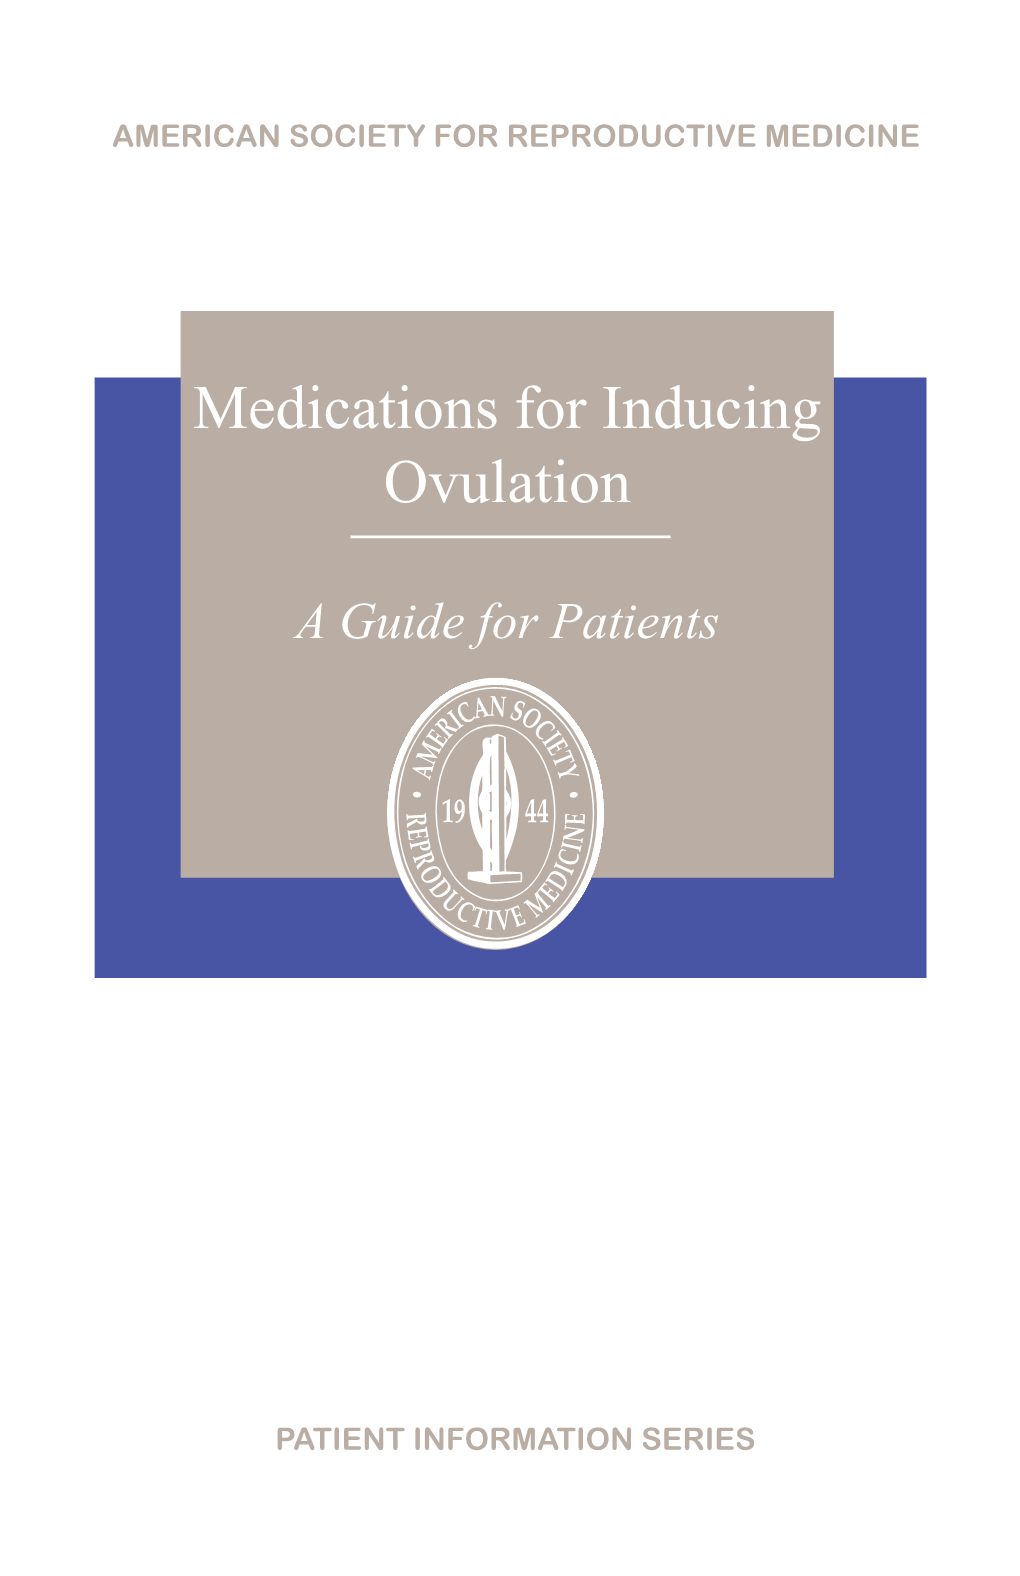 Medications for Inducing Ovulation (Booklet)